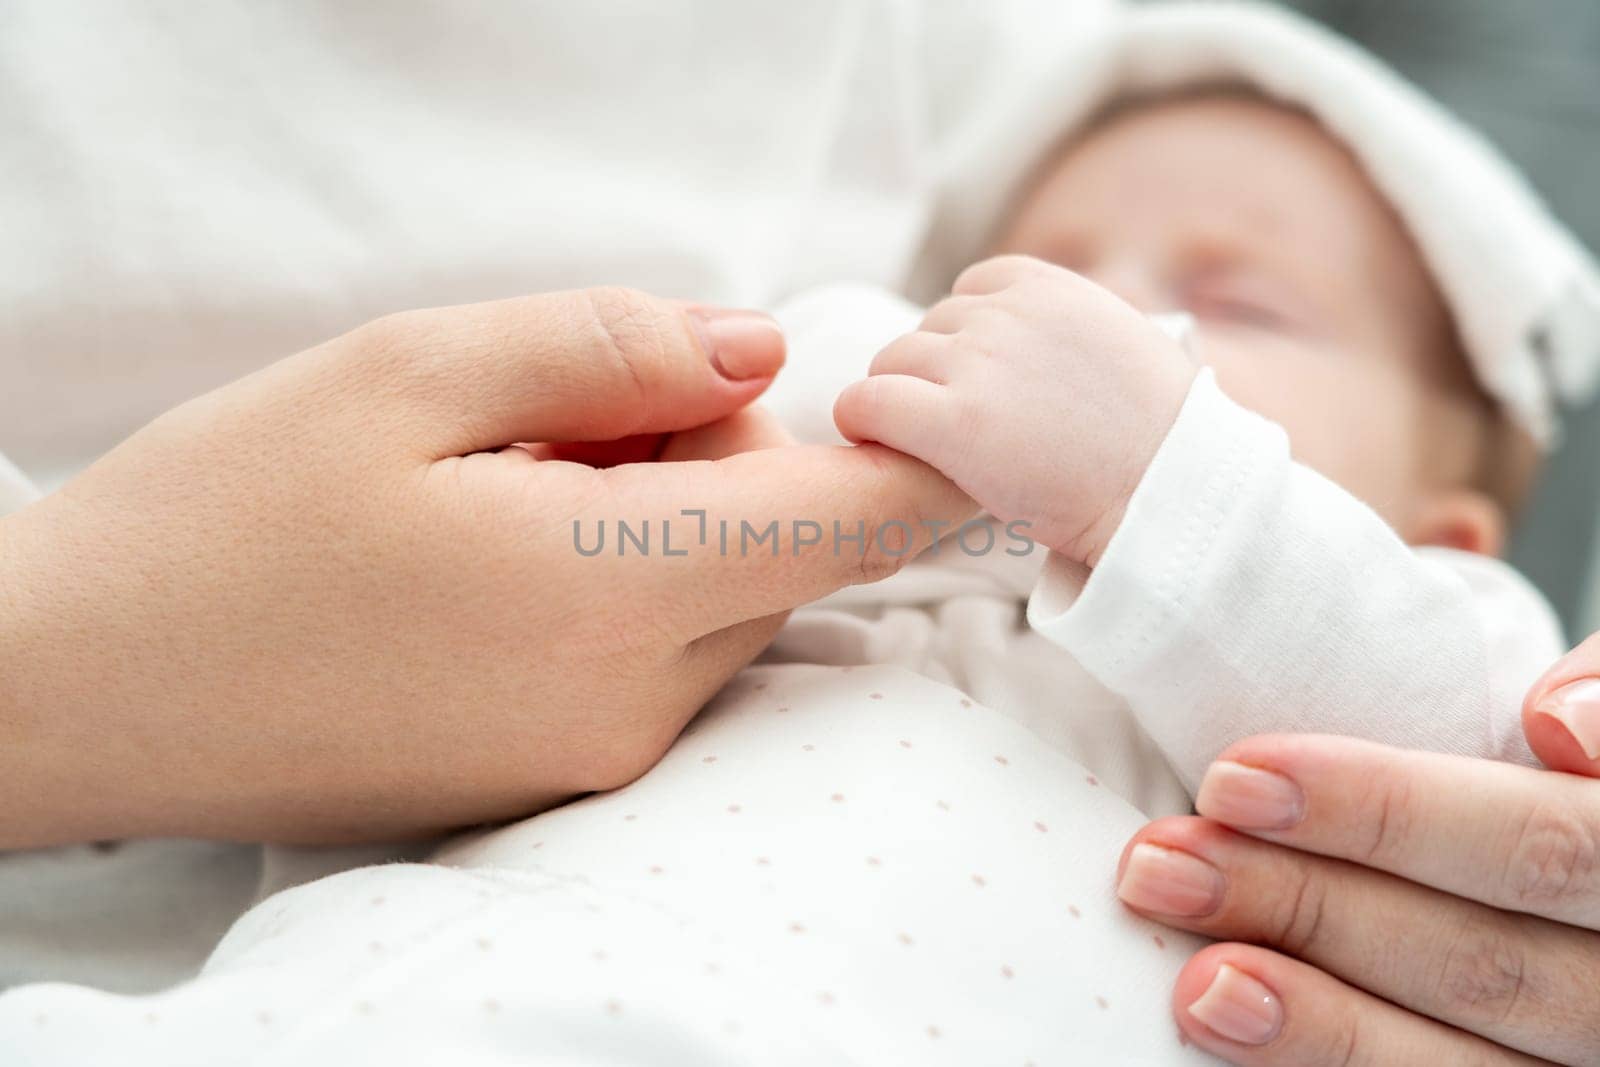 Newborn finds solace holding mother's finger during illness. Concept of maternal comfort in distressing times by Mariakray